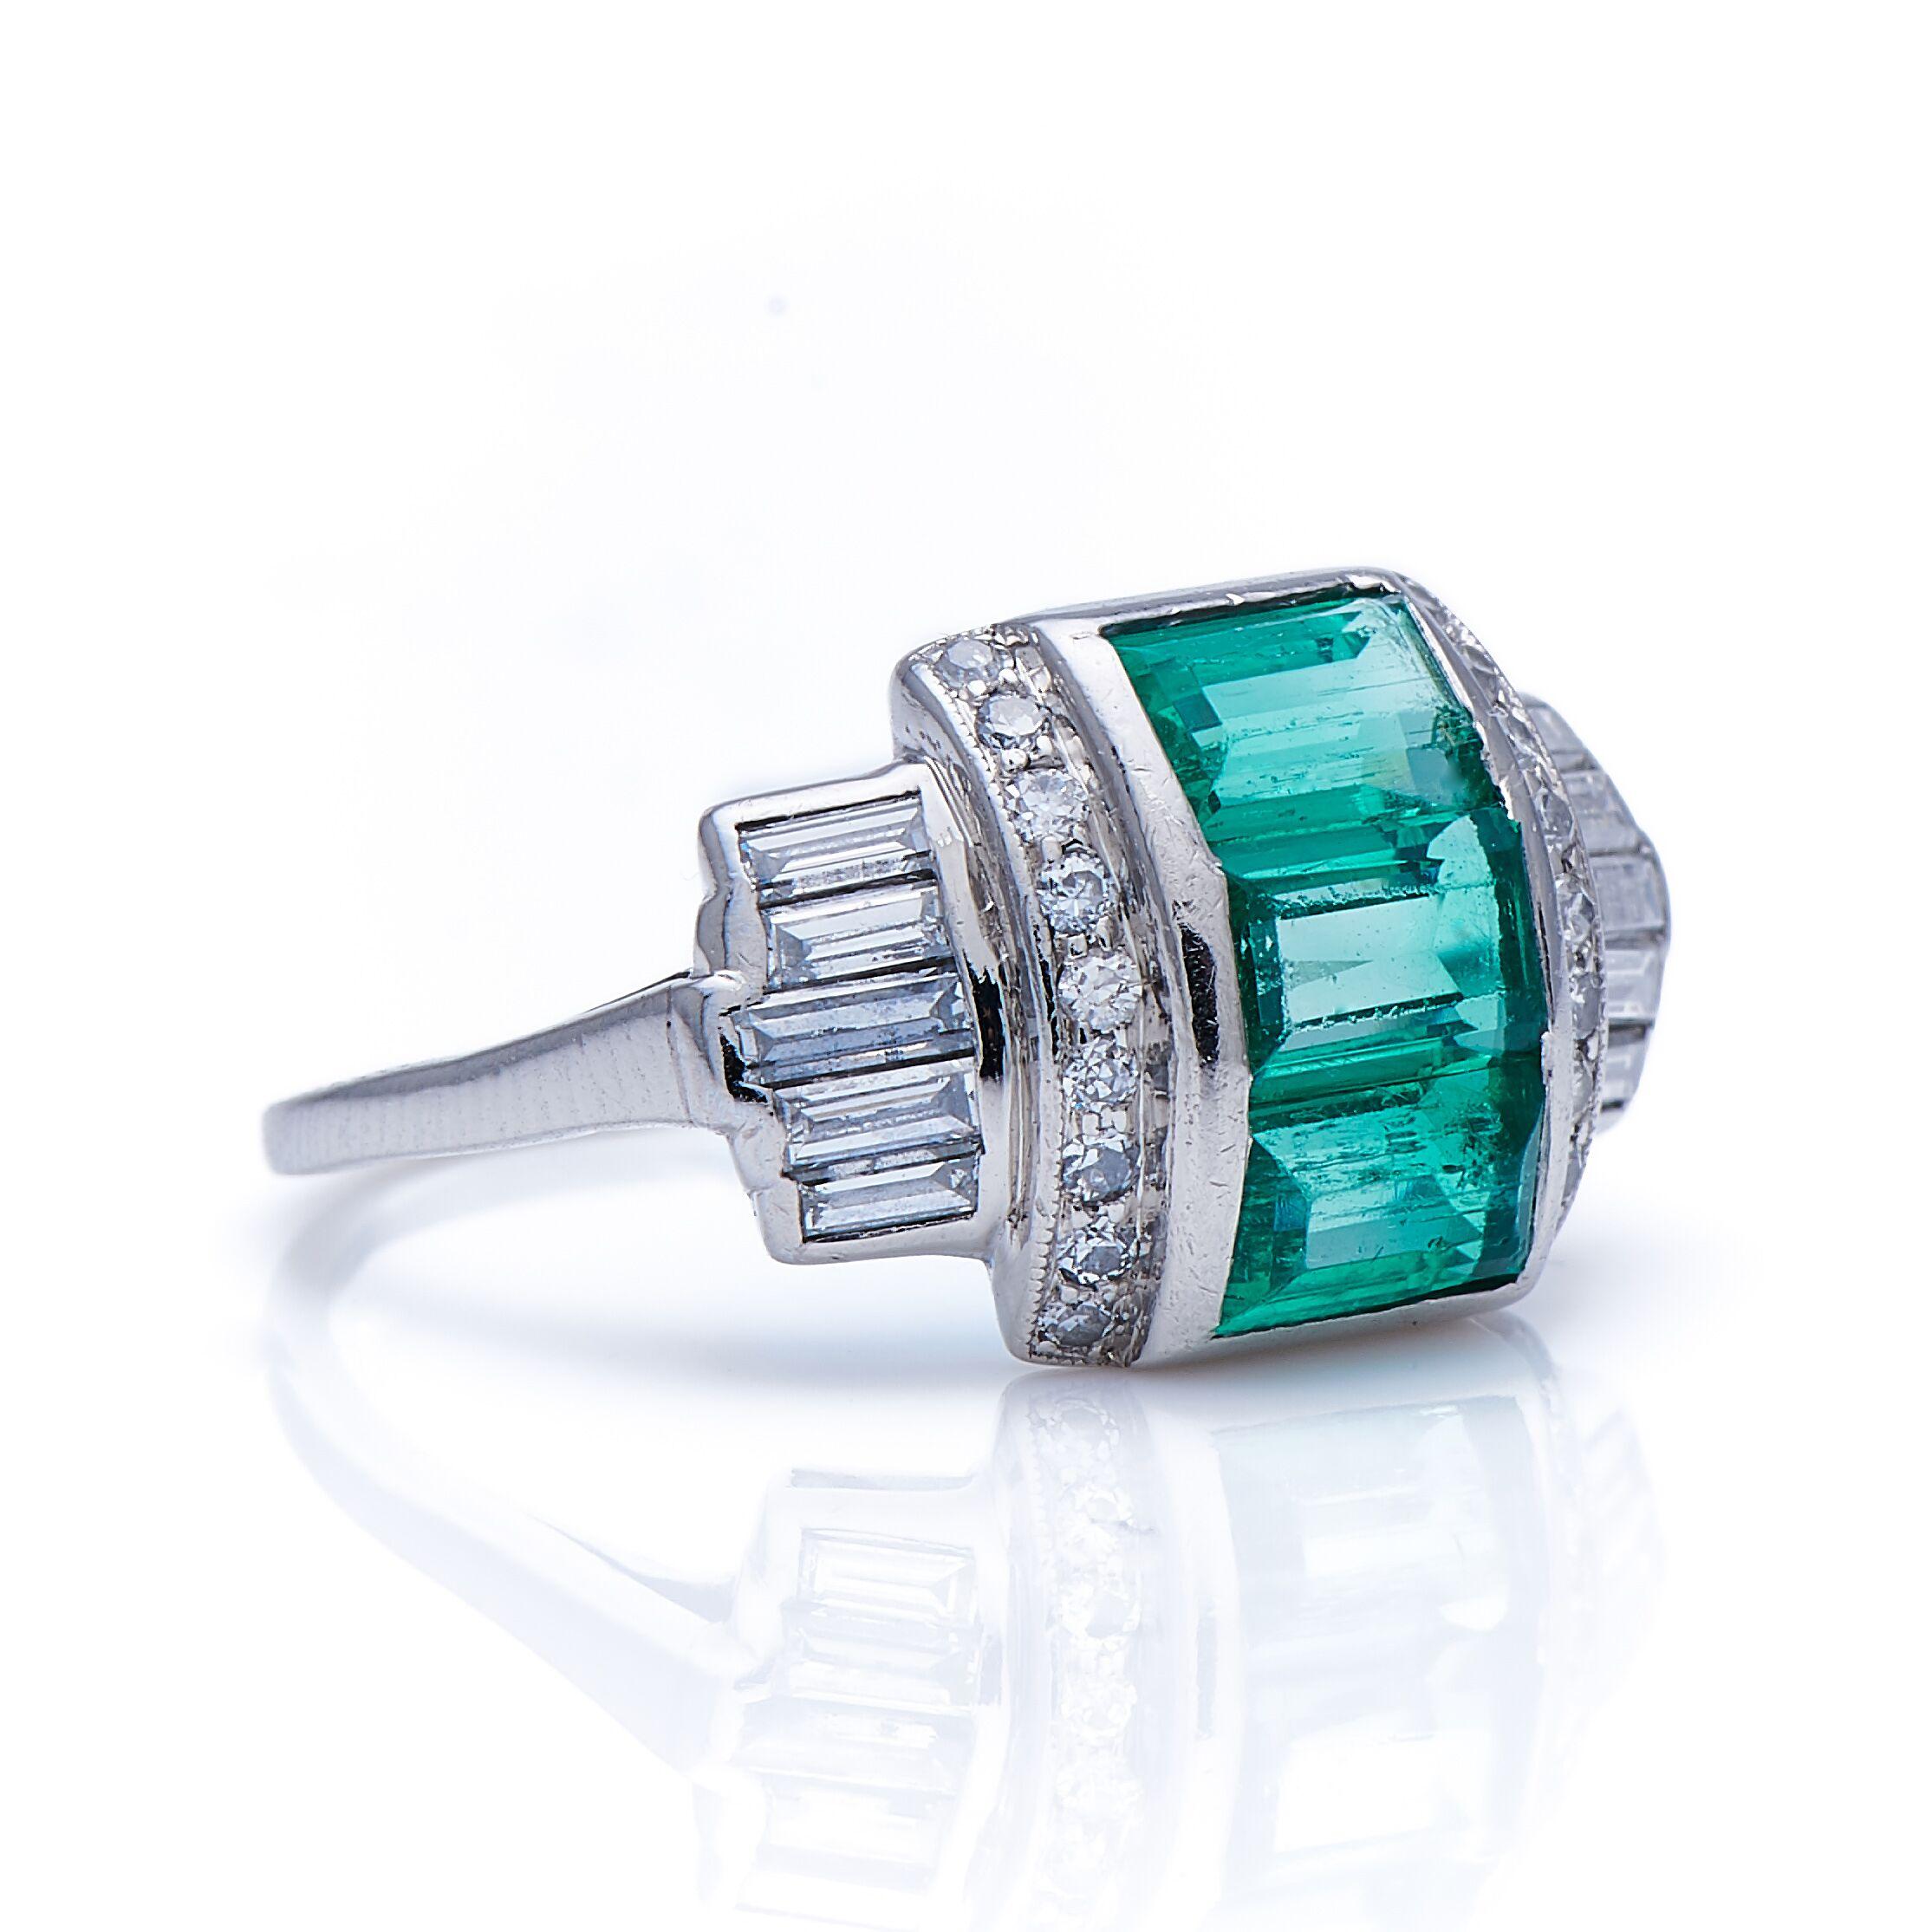 Emerald and diamond ring, circa 1930. This ring is a superb example of 1930s Art Deco, when jewels became more three dimensional and substantial, while retaining the pure geometry of the preceding decade. This domed ring is constructed from a